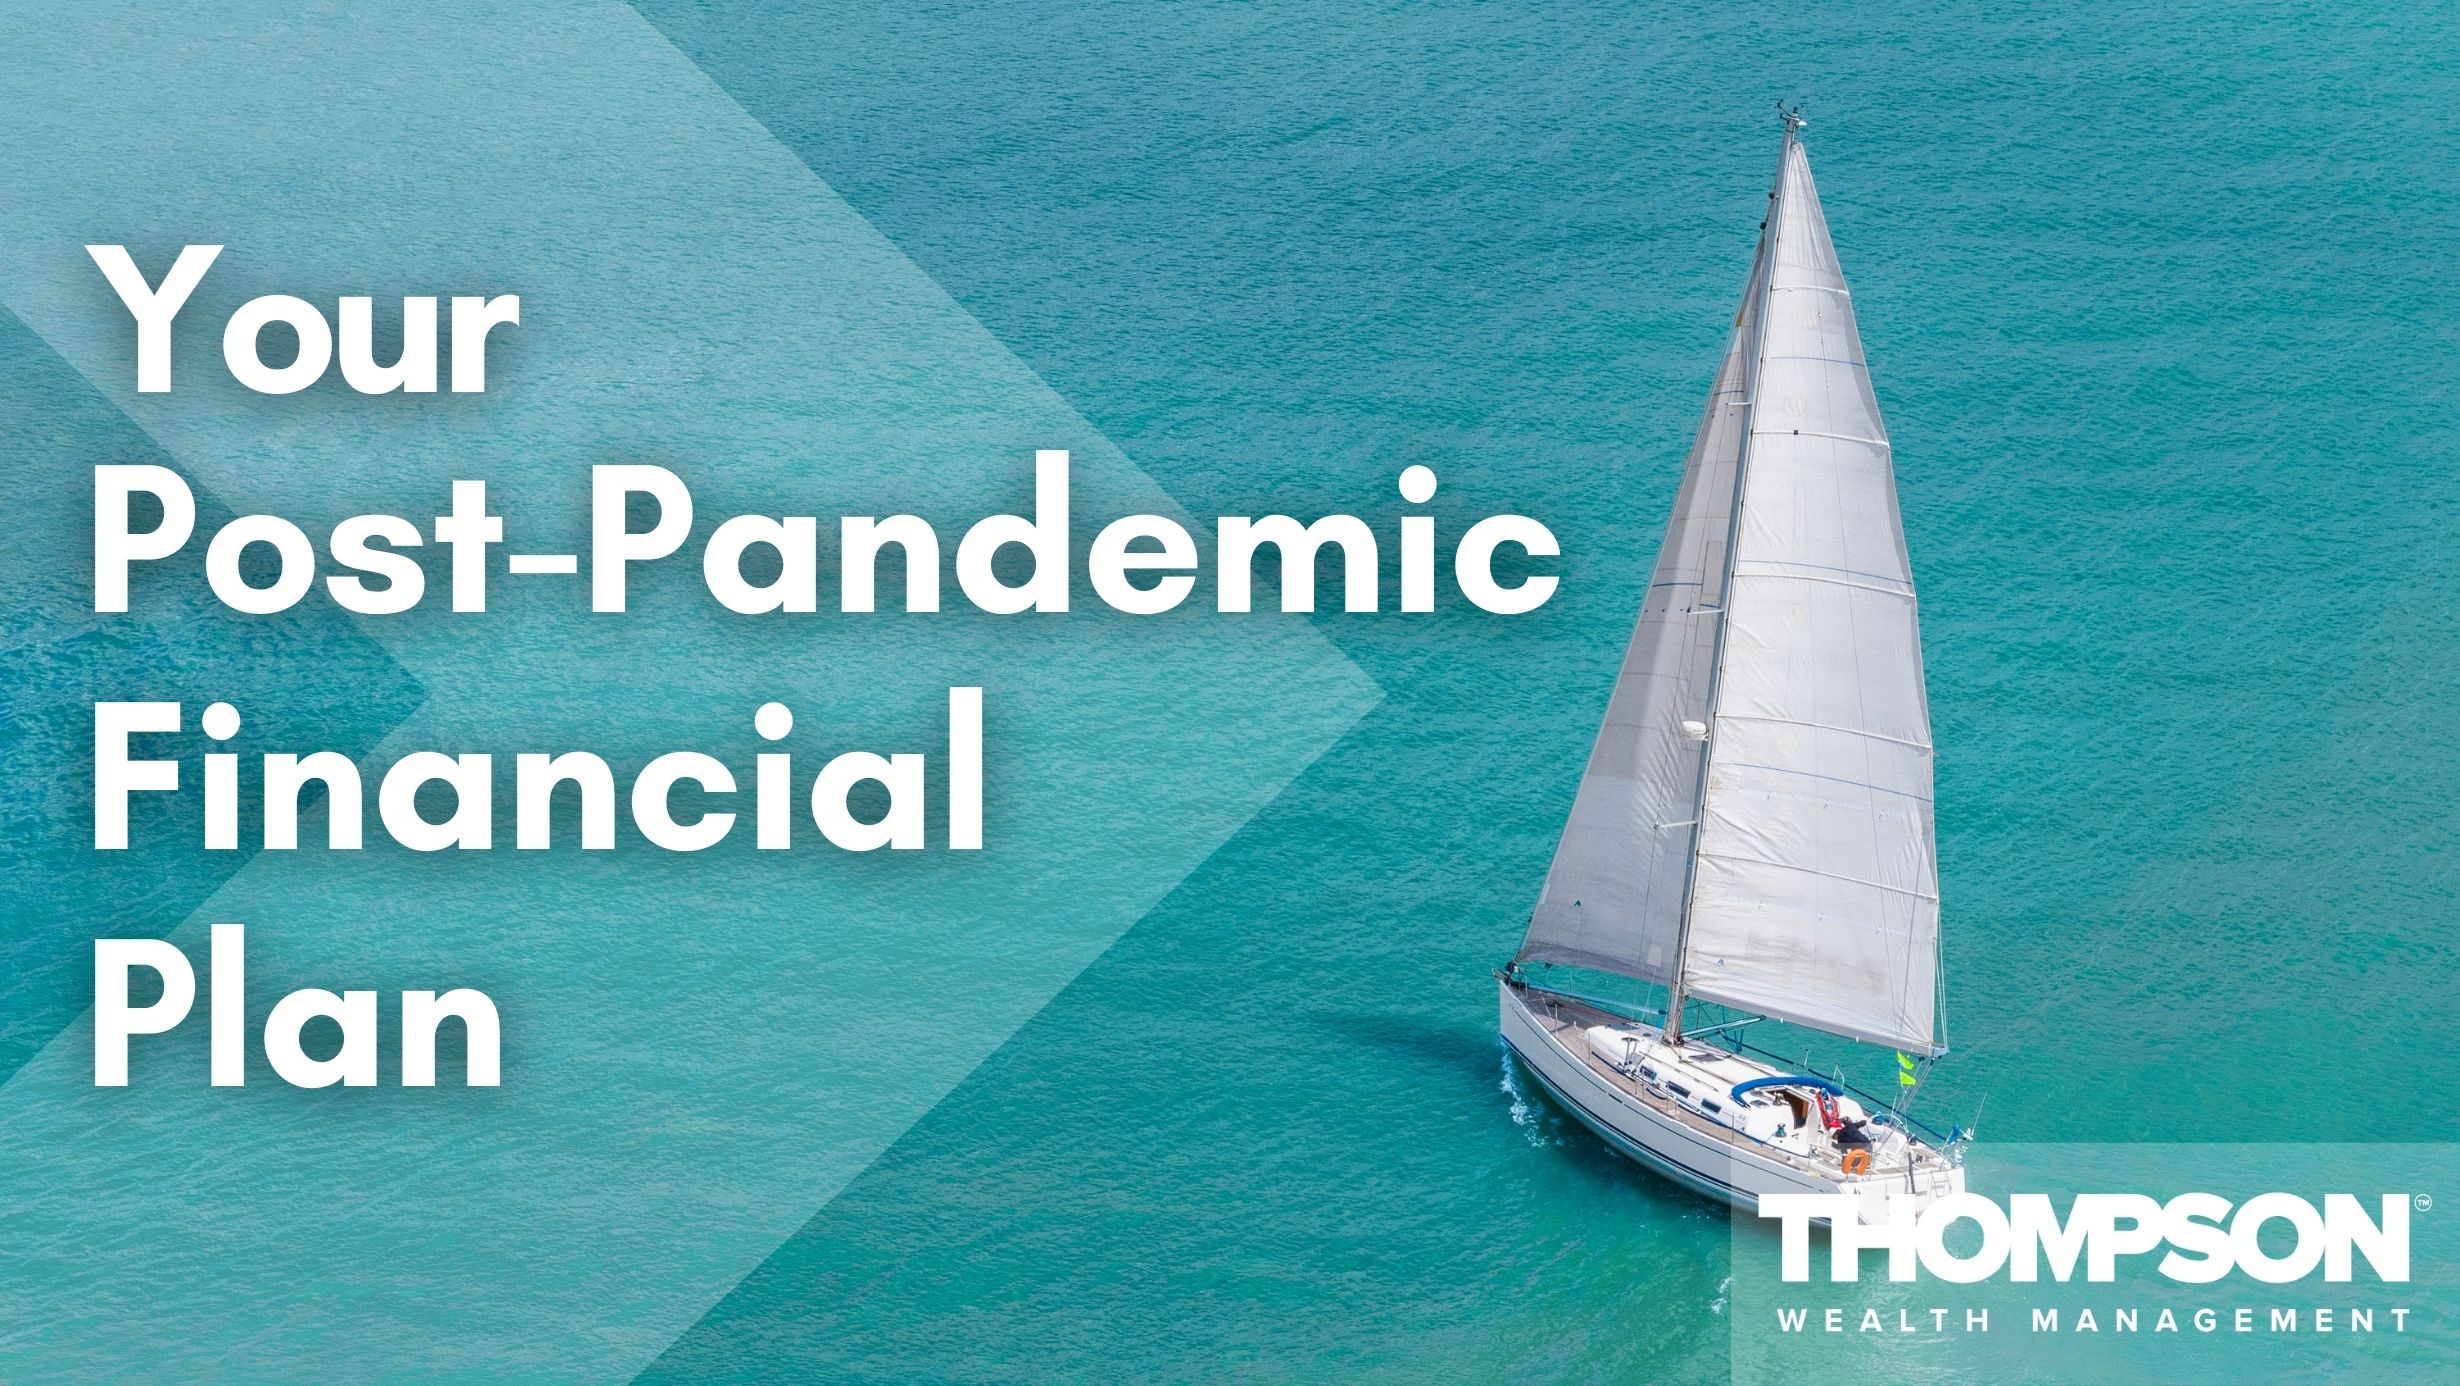 Your Post-Pandemic Financial Plan